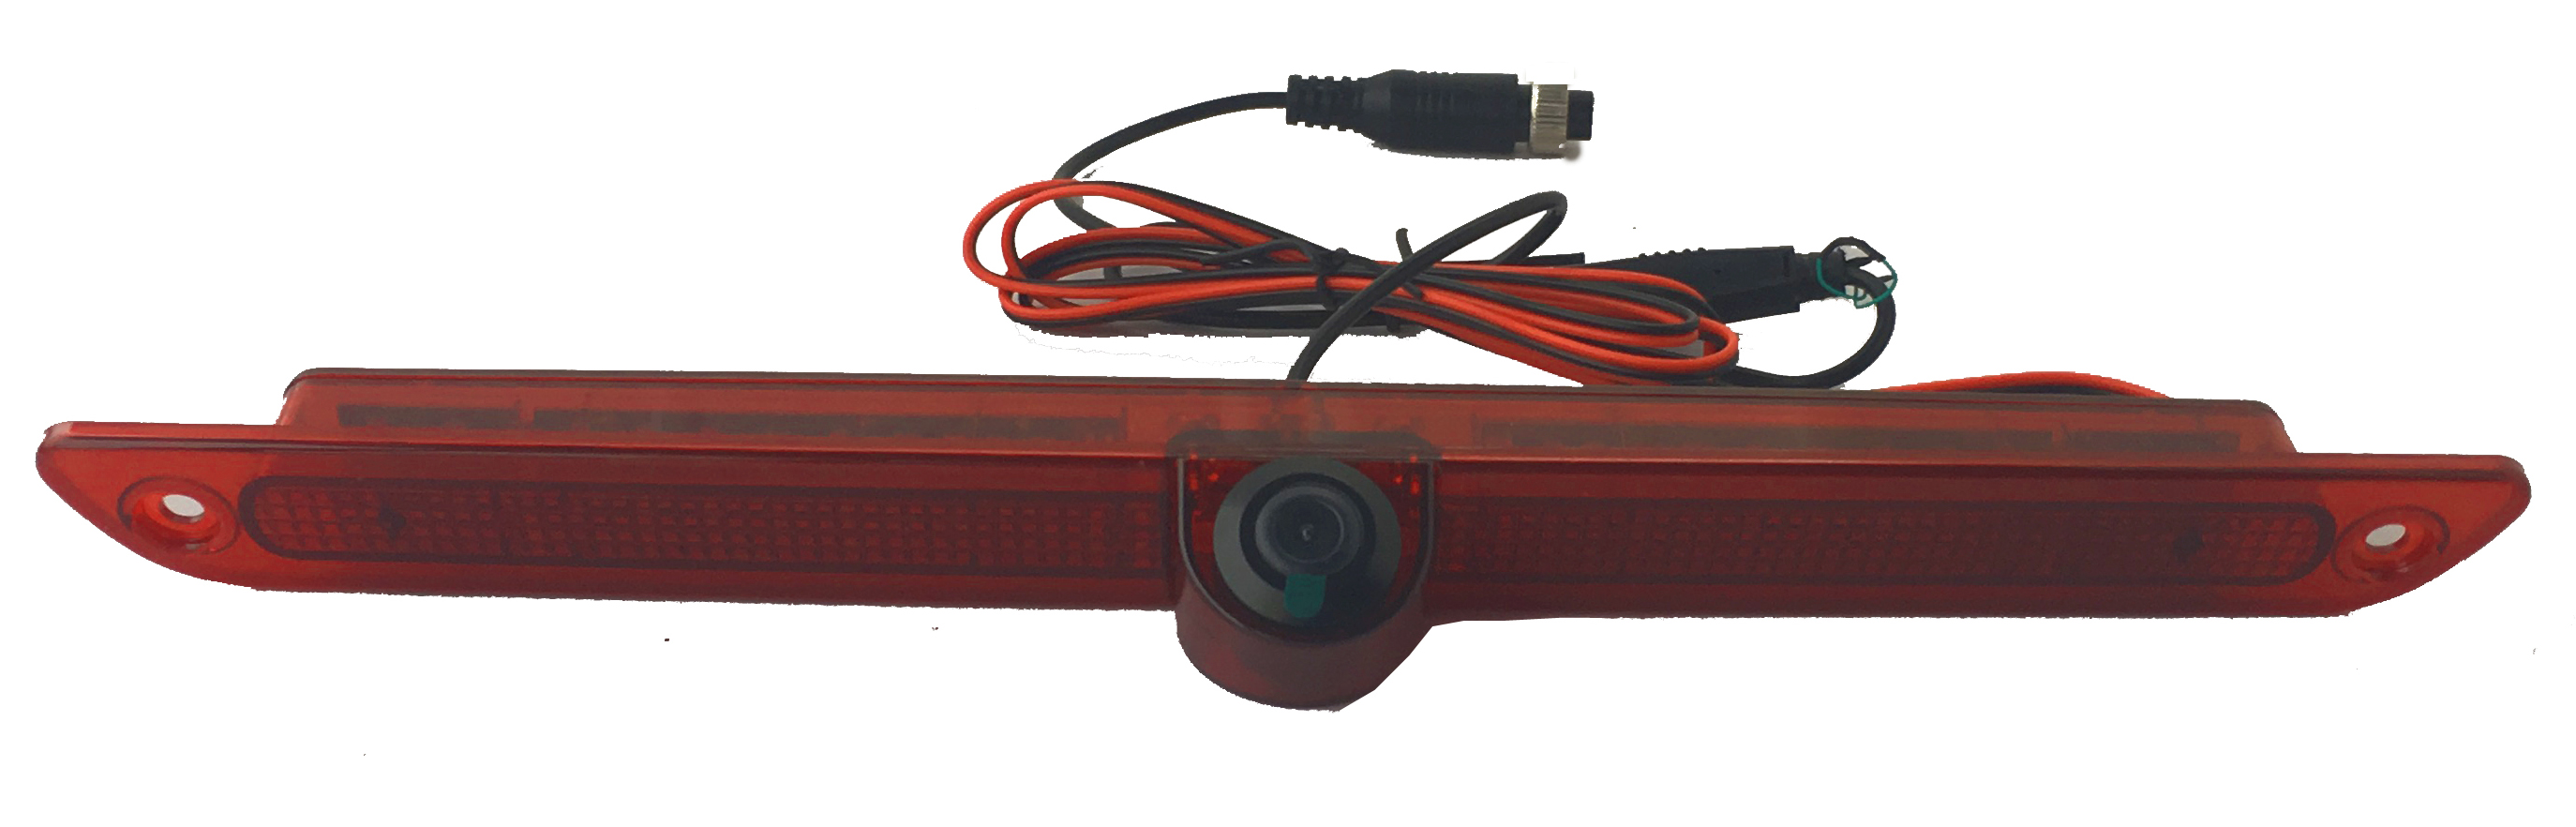 Car CCD Reversing Rear View Camera IR Parking Night Vision Backup for Mercedes benz Sprinter VW Crafter